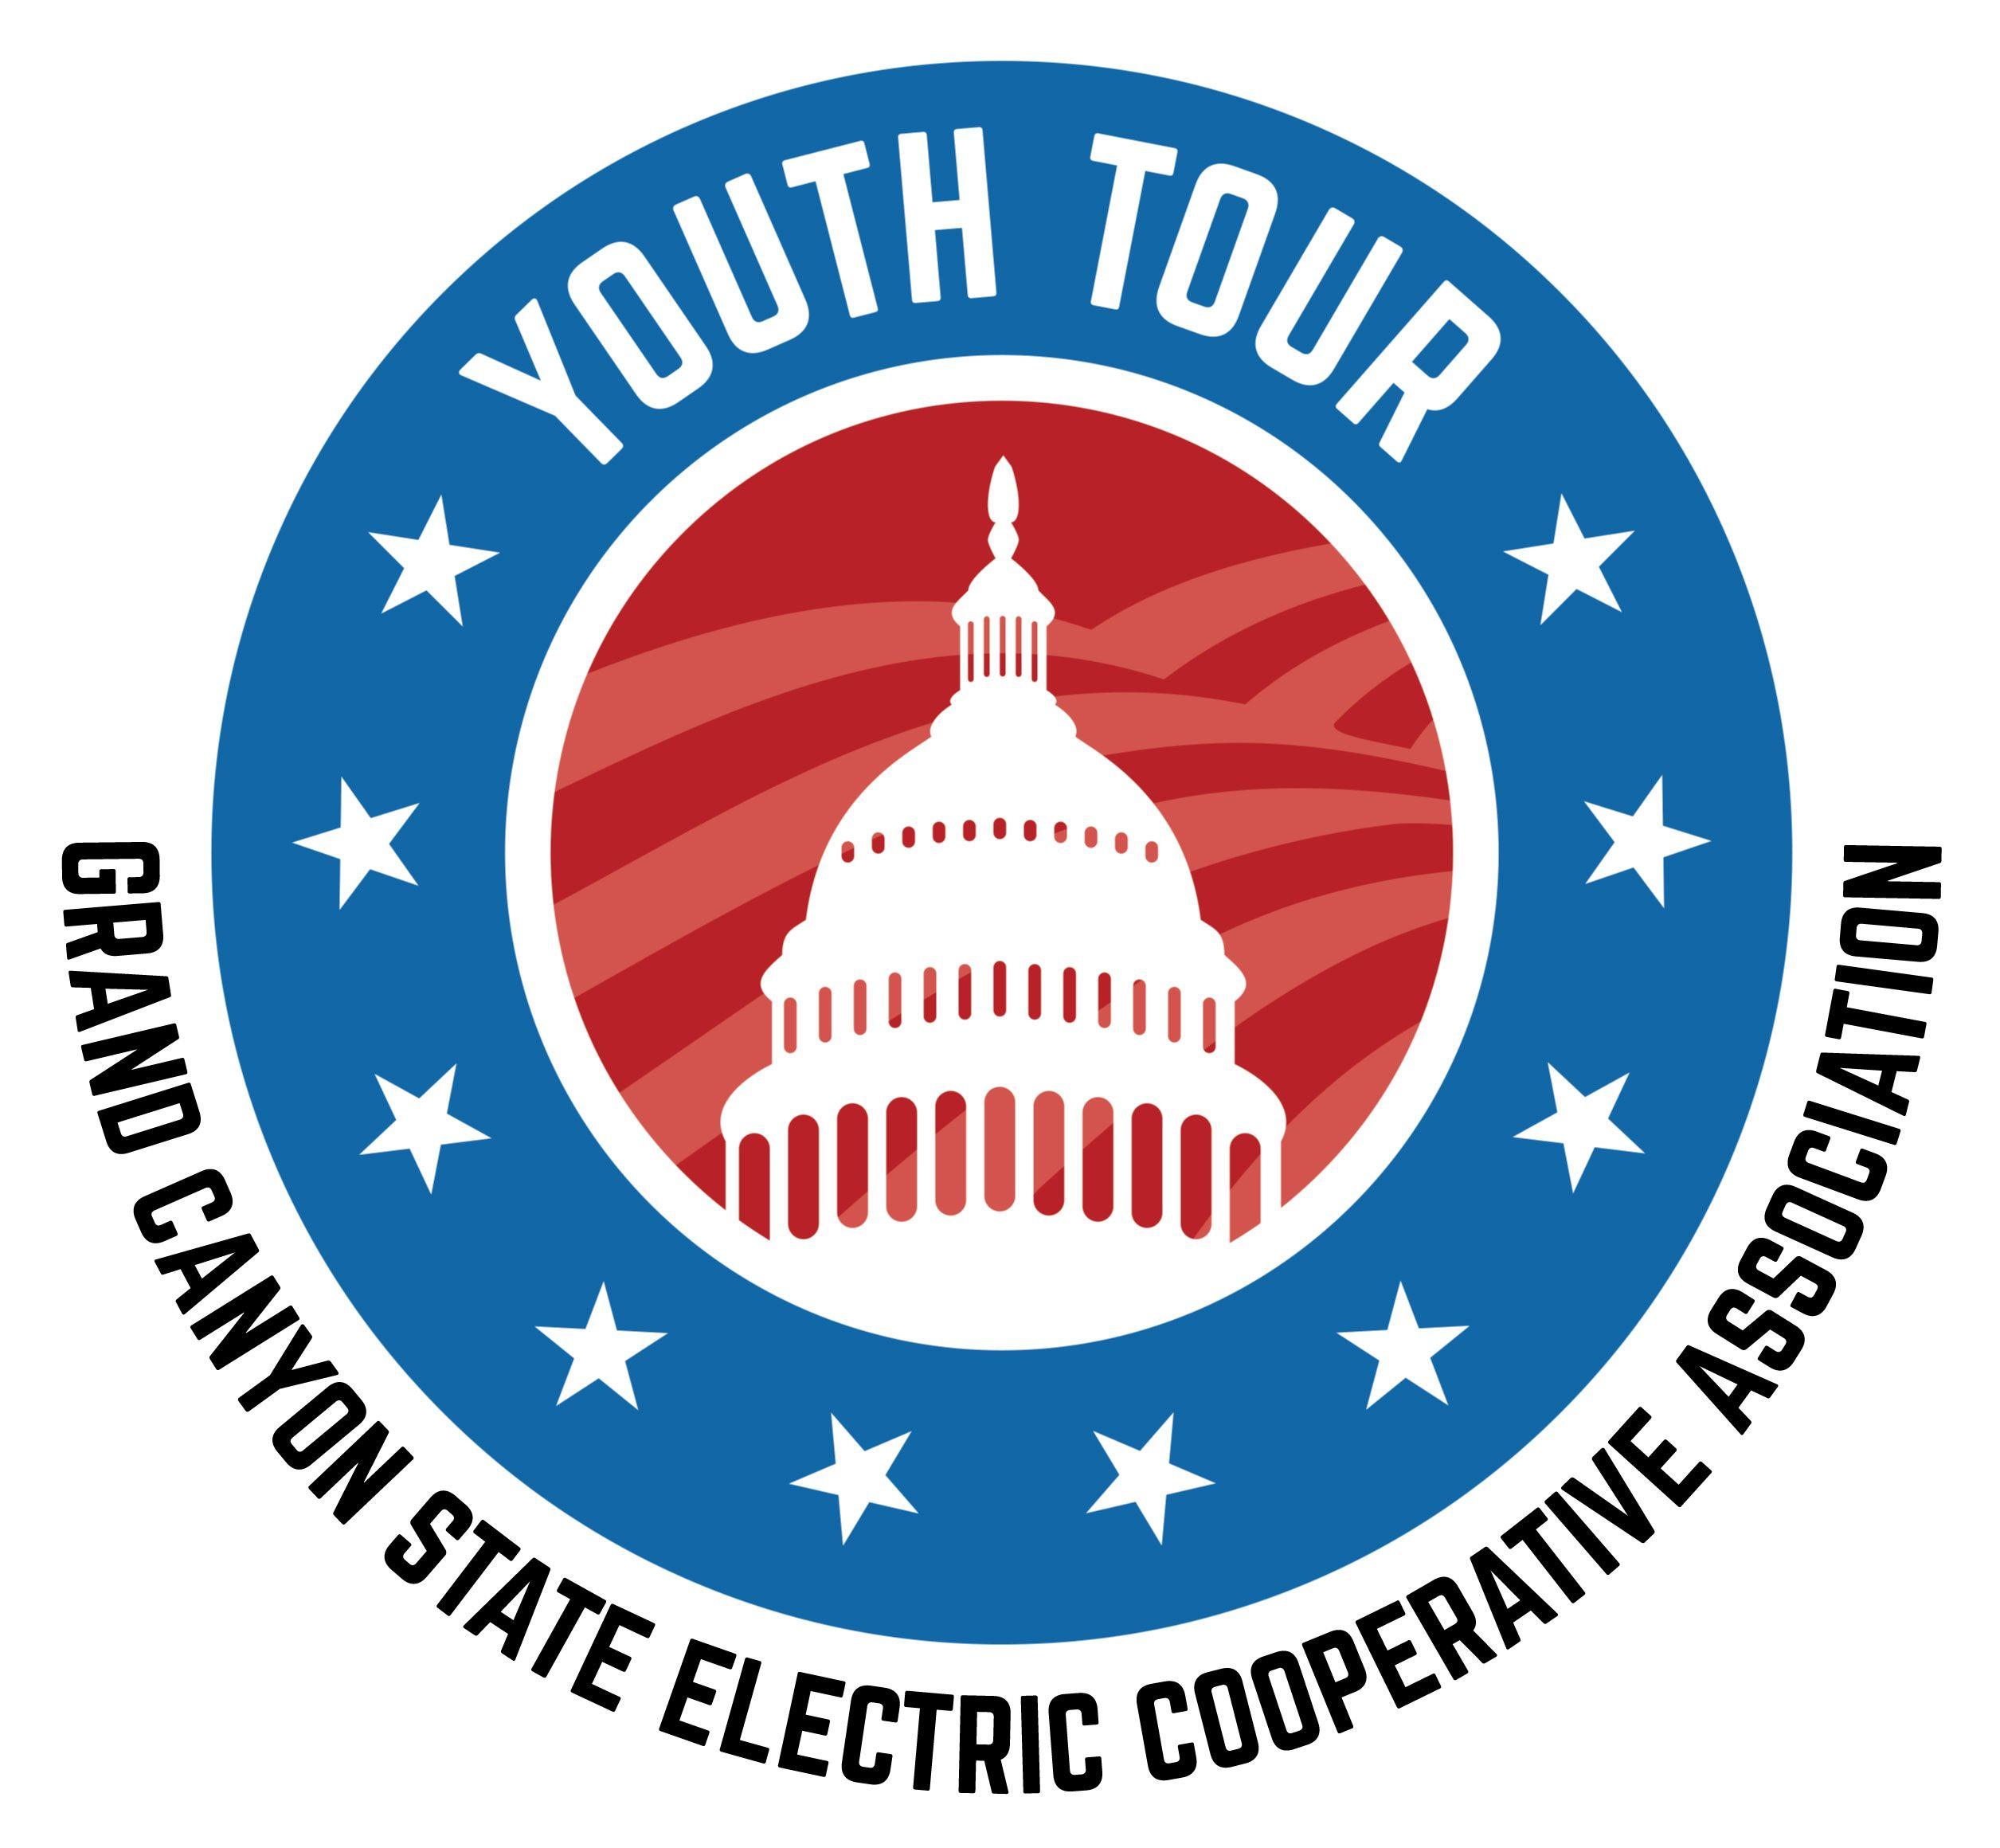 Grand Canyon State Logo - Youth Tour | Grand Canyon State Electric Cooperative Association